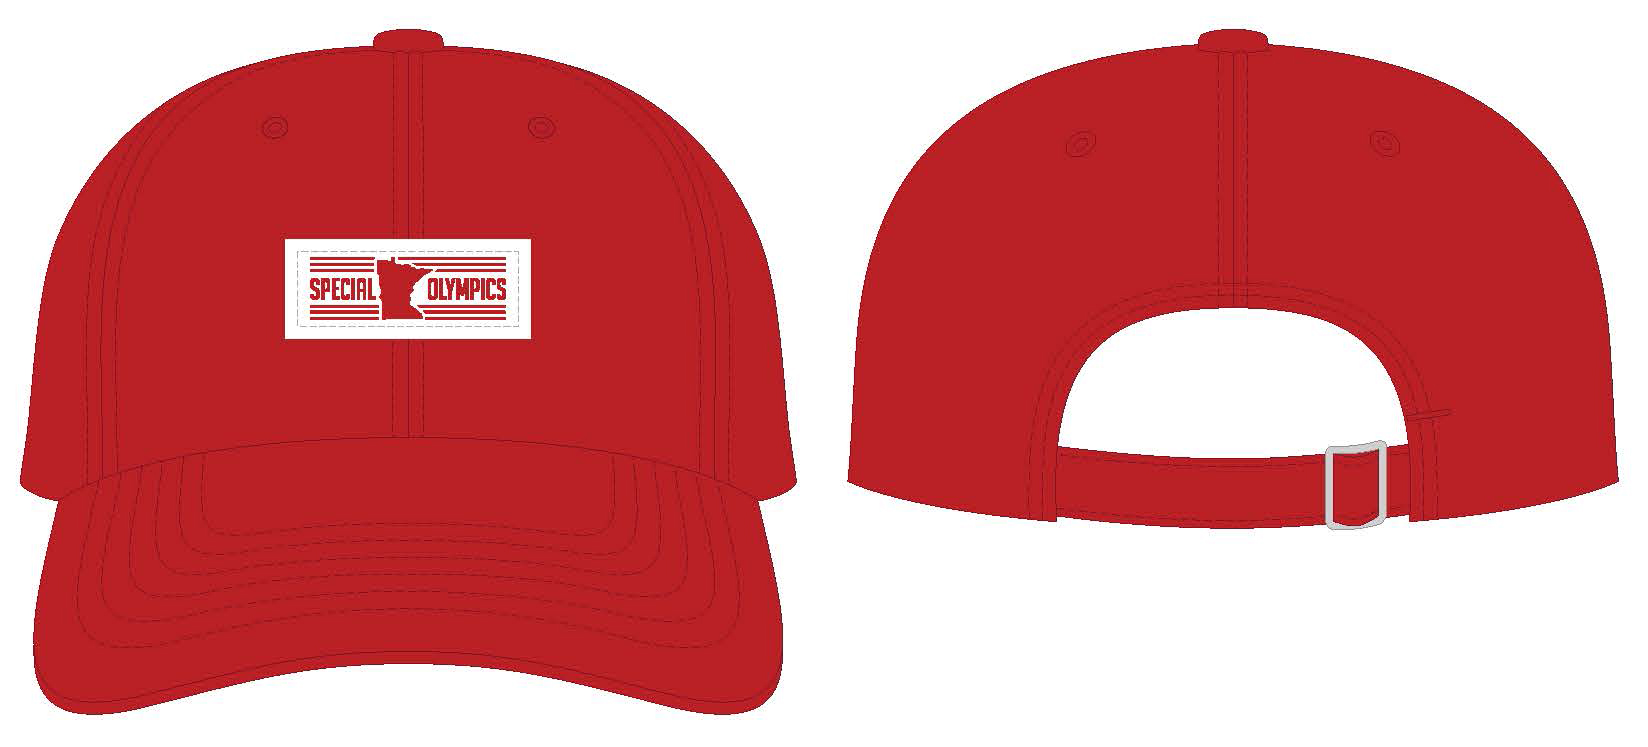 Adjustable Fit Cap in Four Colors! - Special Olympics Minnesota